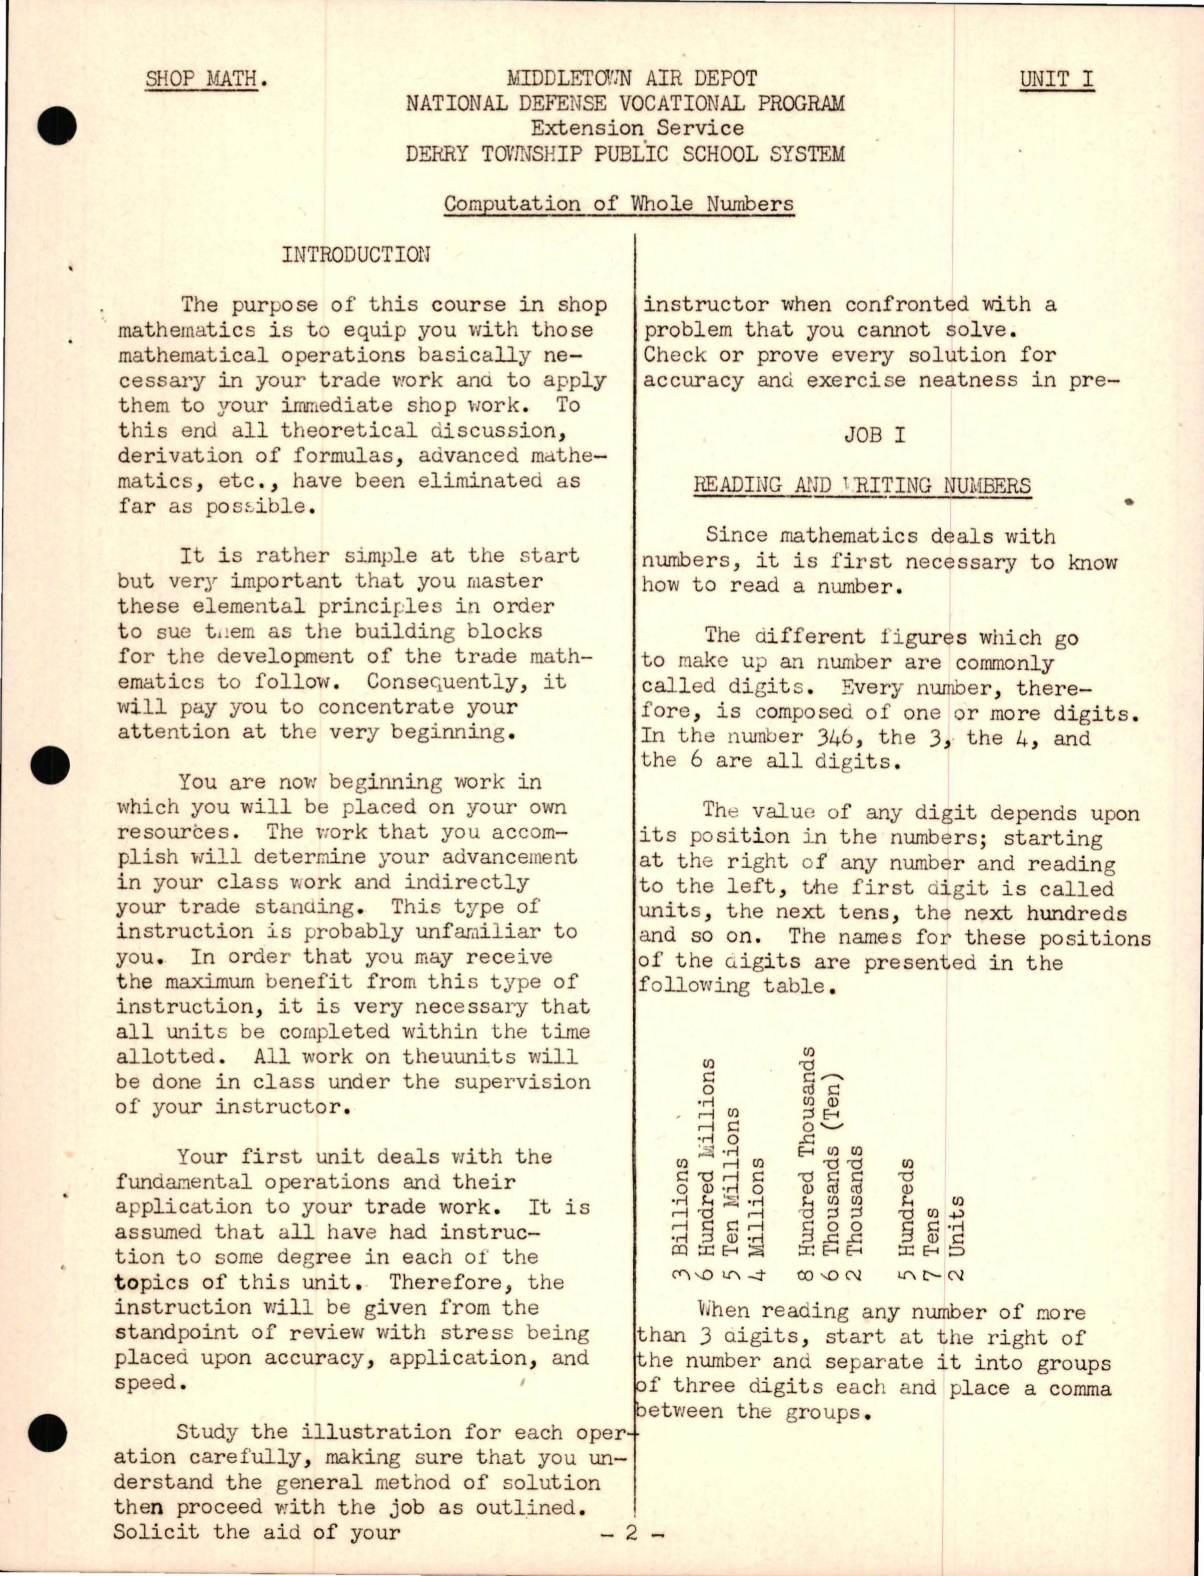 Sample page 5 from AirCorps Library document: Practical Shop Mathematics for Aviation Mechanics - Unit I Engineering Section